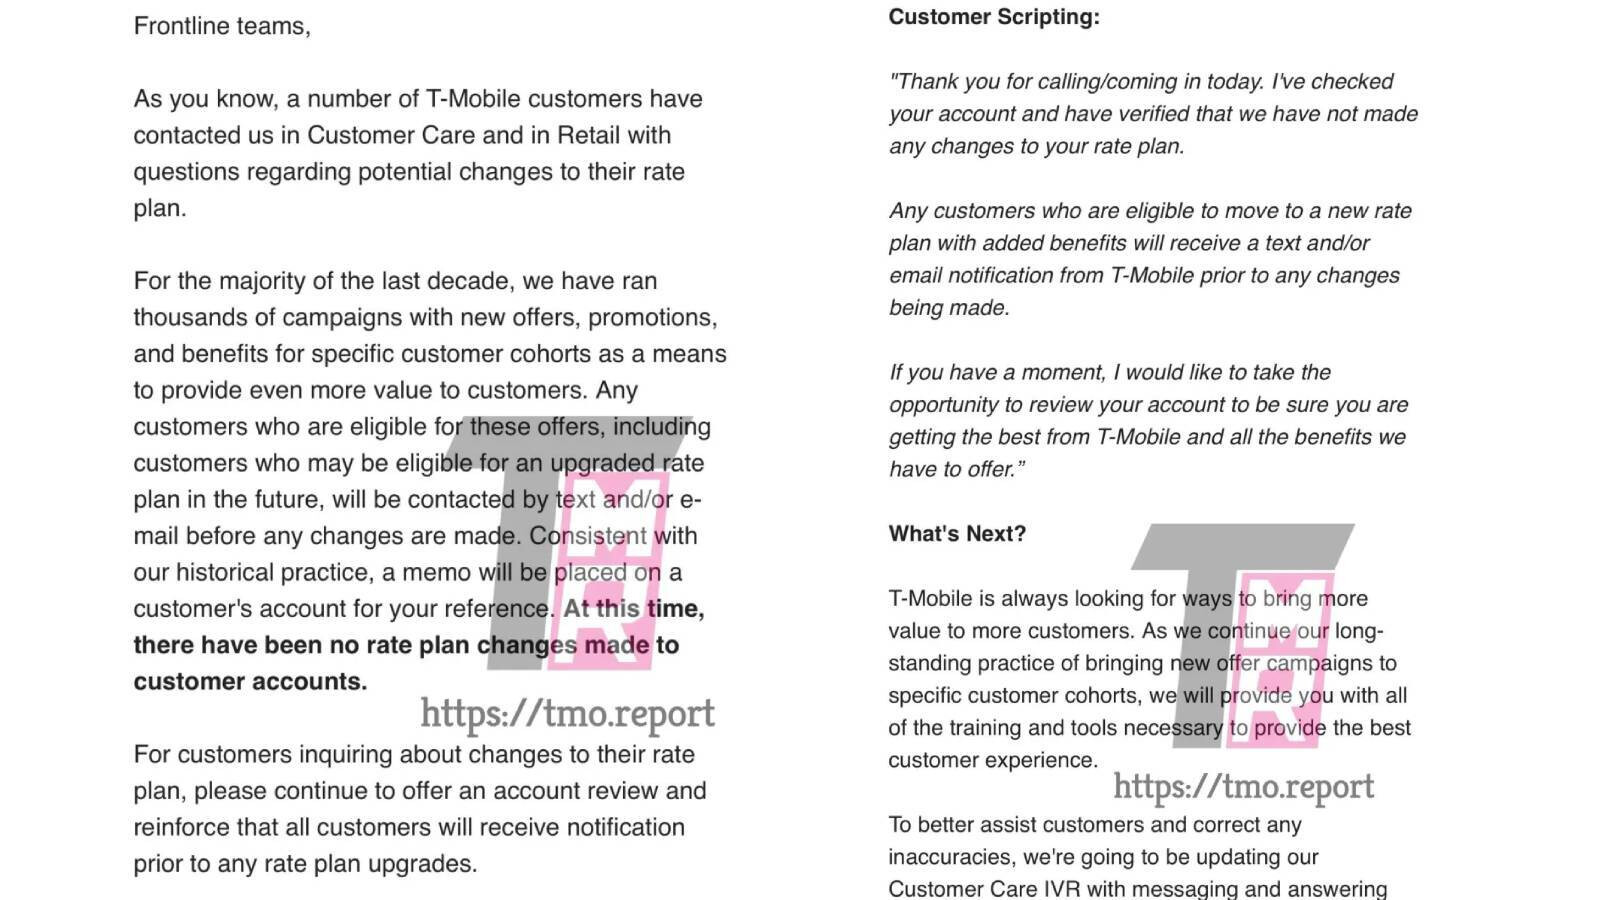 Maybe you were a little too hard on T-Mobile or maybe that's why some changes were rolled back.